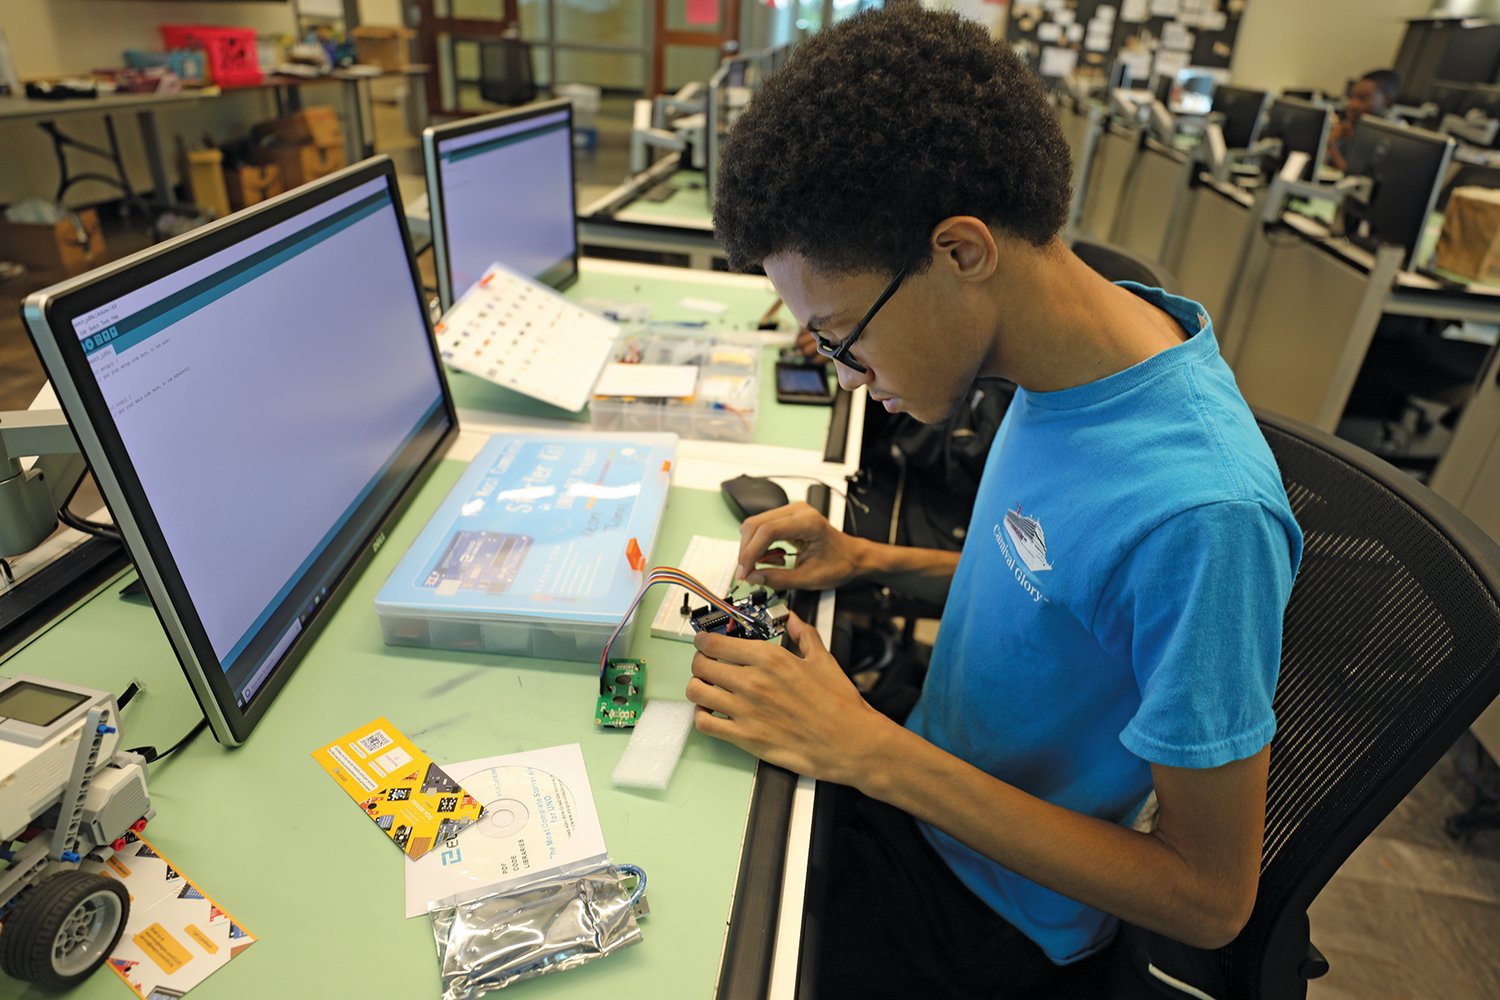 Students ages 13 to 17 will have the opportunity to participate in an Arduino and Python Coding Virtual Boot Camp starting Tuesday, Oct. 27. Camp participants learn how to use the Python programming language to drive Arduino microcontrollers.